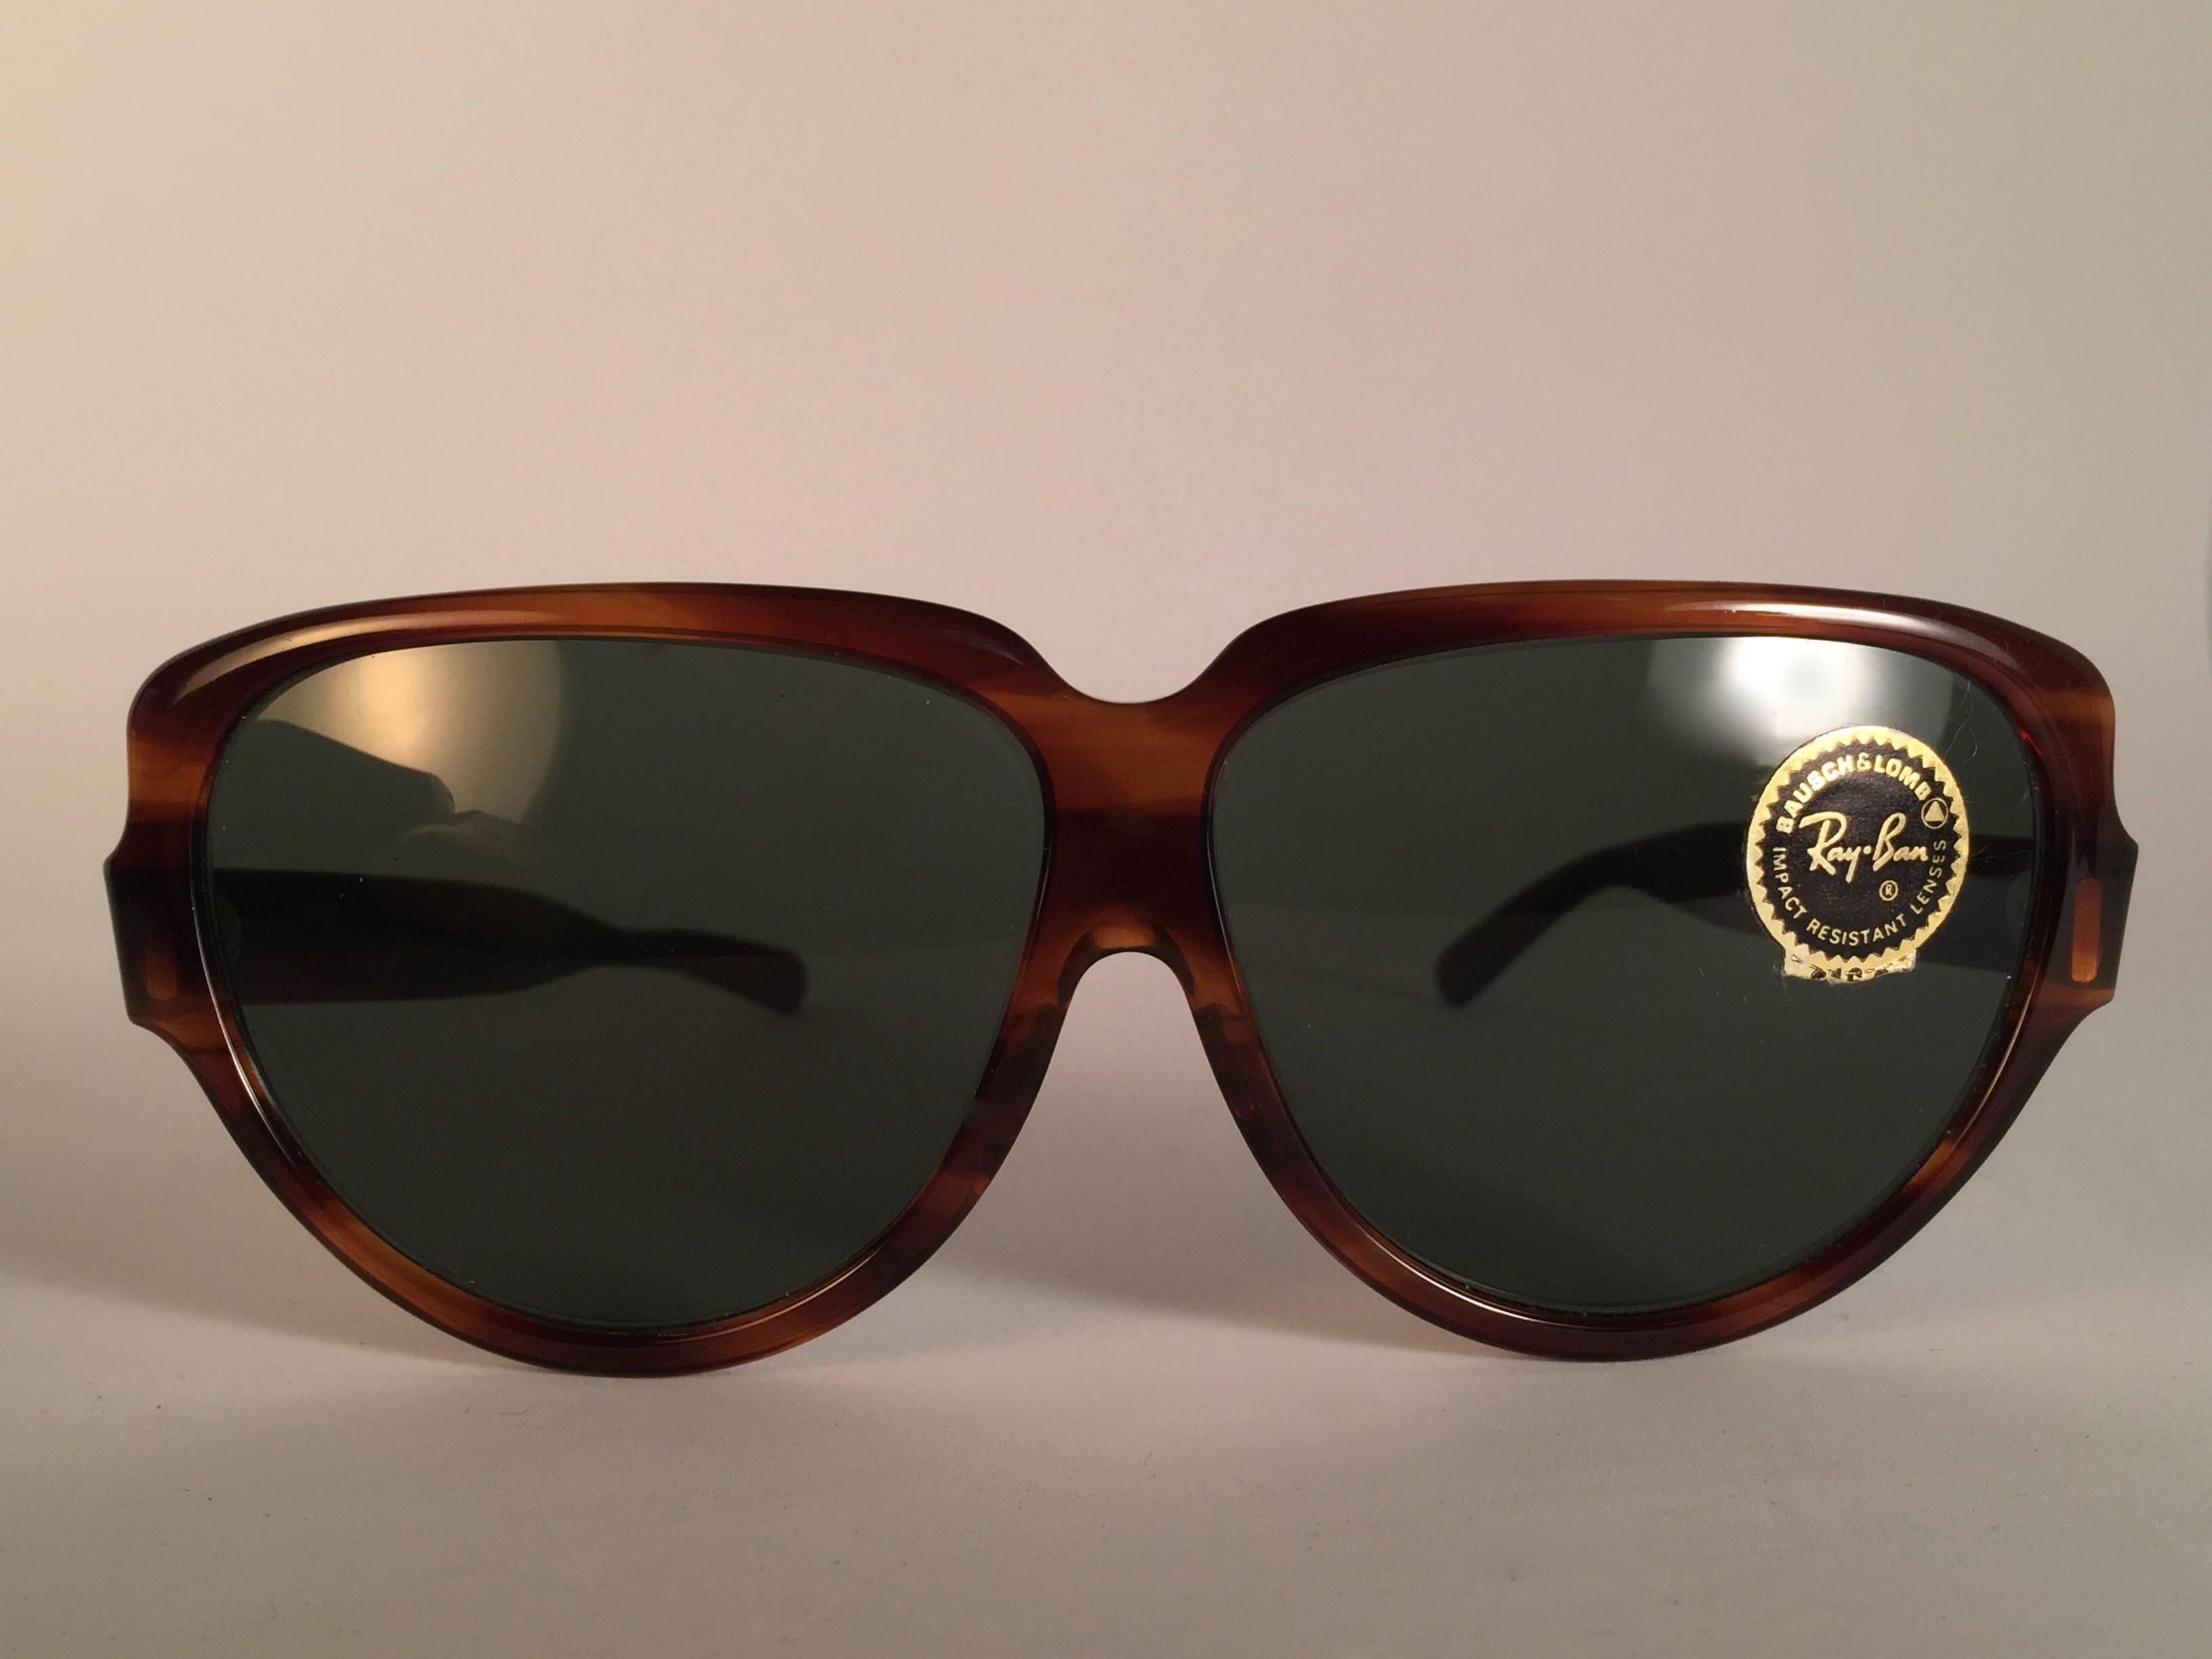 New classic Lynwood in tortoise. B&L etched in both G15 grey lenses. 

Please notice that this item is nearly 50 years old and could show some storage wear. New, ever worn or displayed. Made in USA.